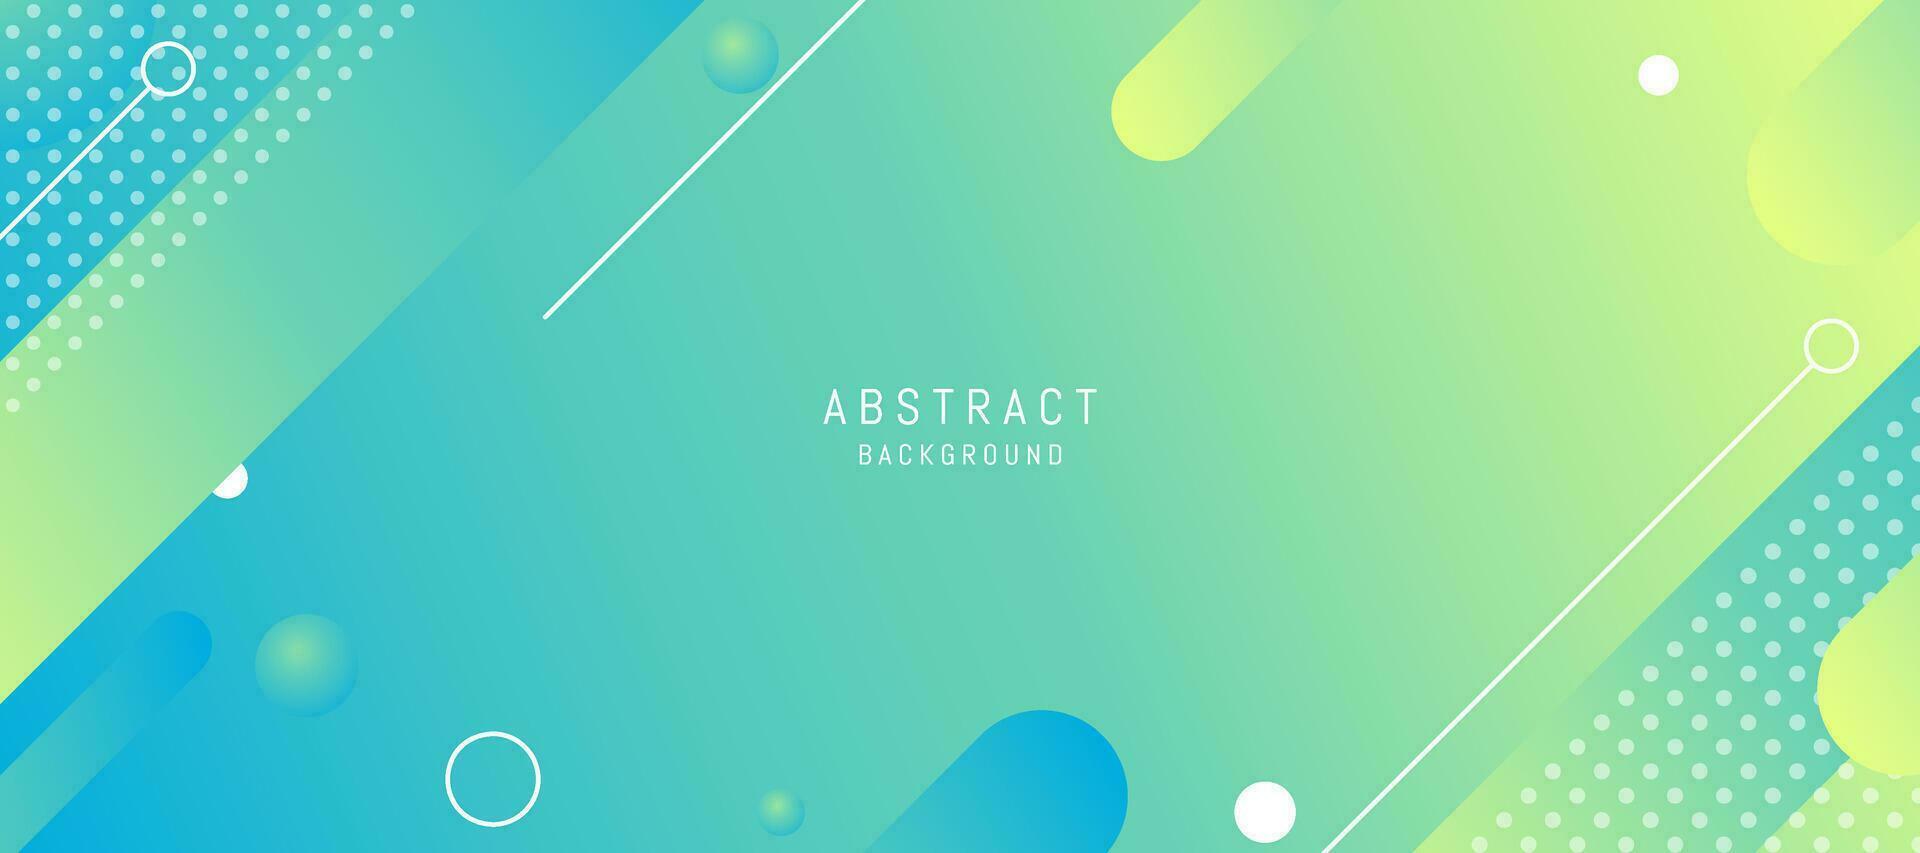 Geometric gradient abstract background. Colorful presentation background vector